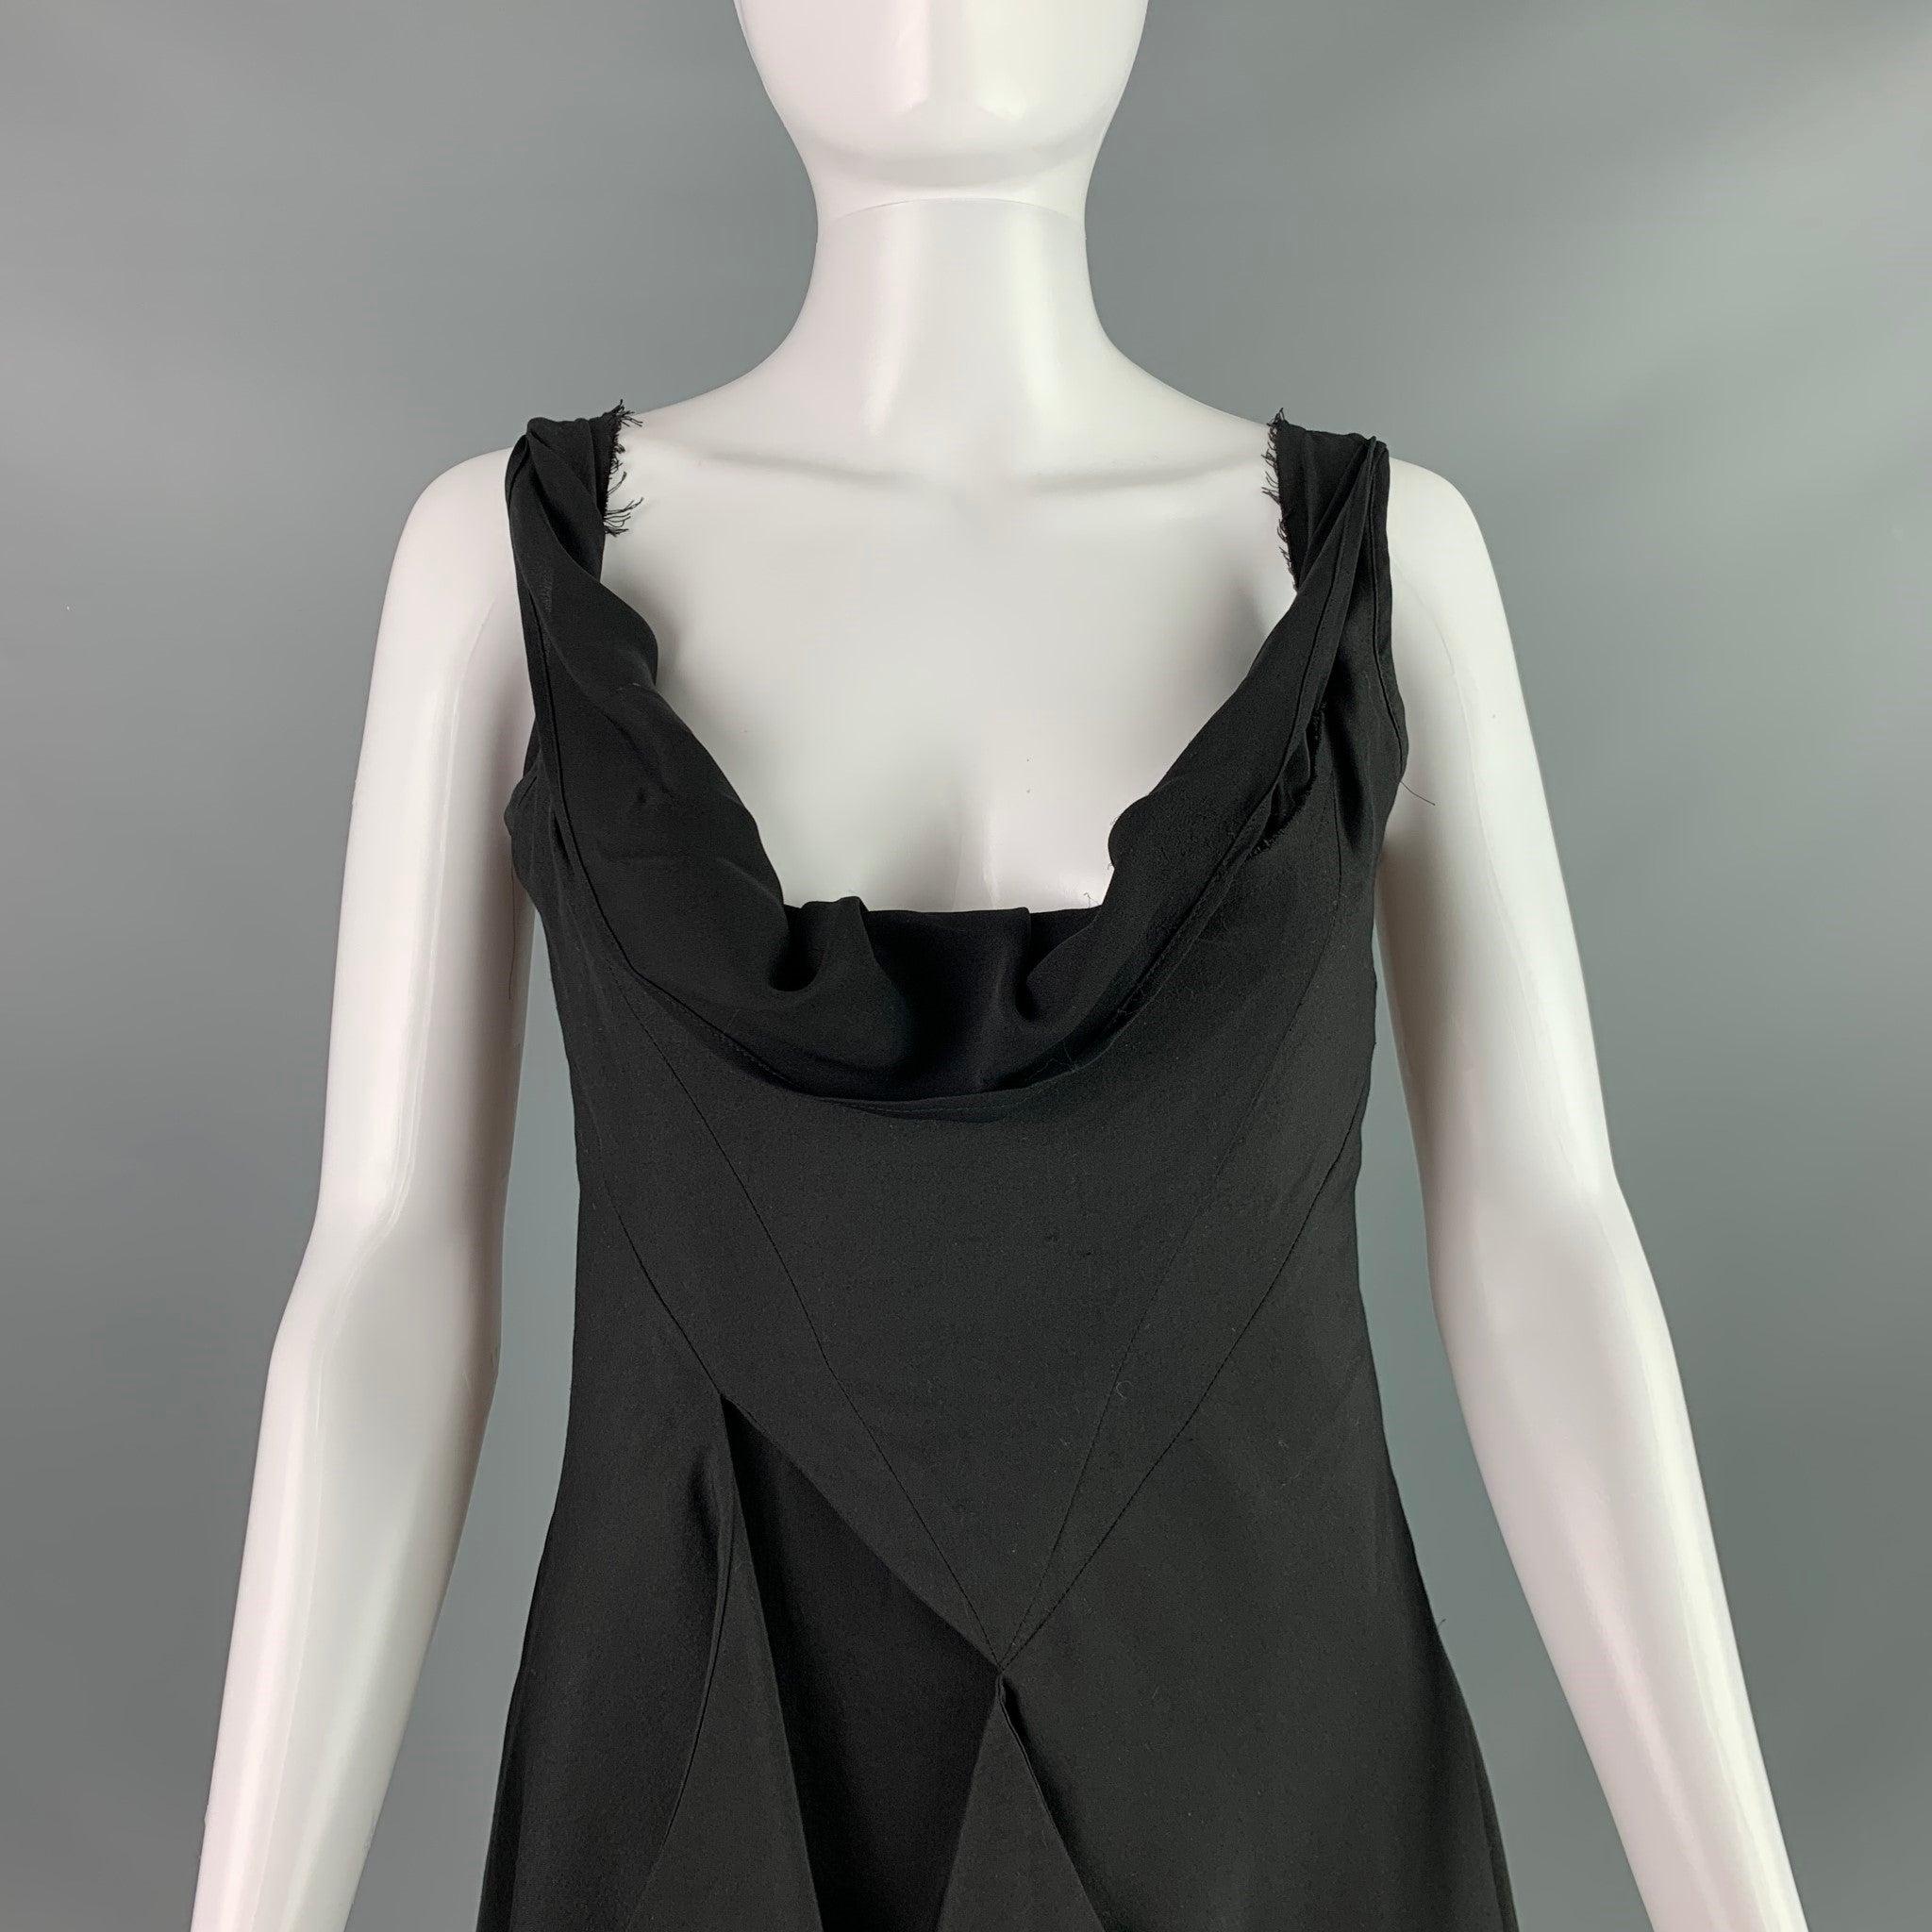 YOHJI YAMAMOTO sleeveless asymmetrical dress comes in a black silk woven material featuring layered aesthetic, draped neckline, and zip up closure at back. Made in Japan.Excellent Pre-Owned Condition. 

Marked:  1 

Measurements: 
 
Shoulder: 12.5